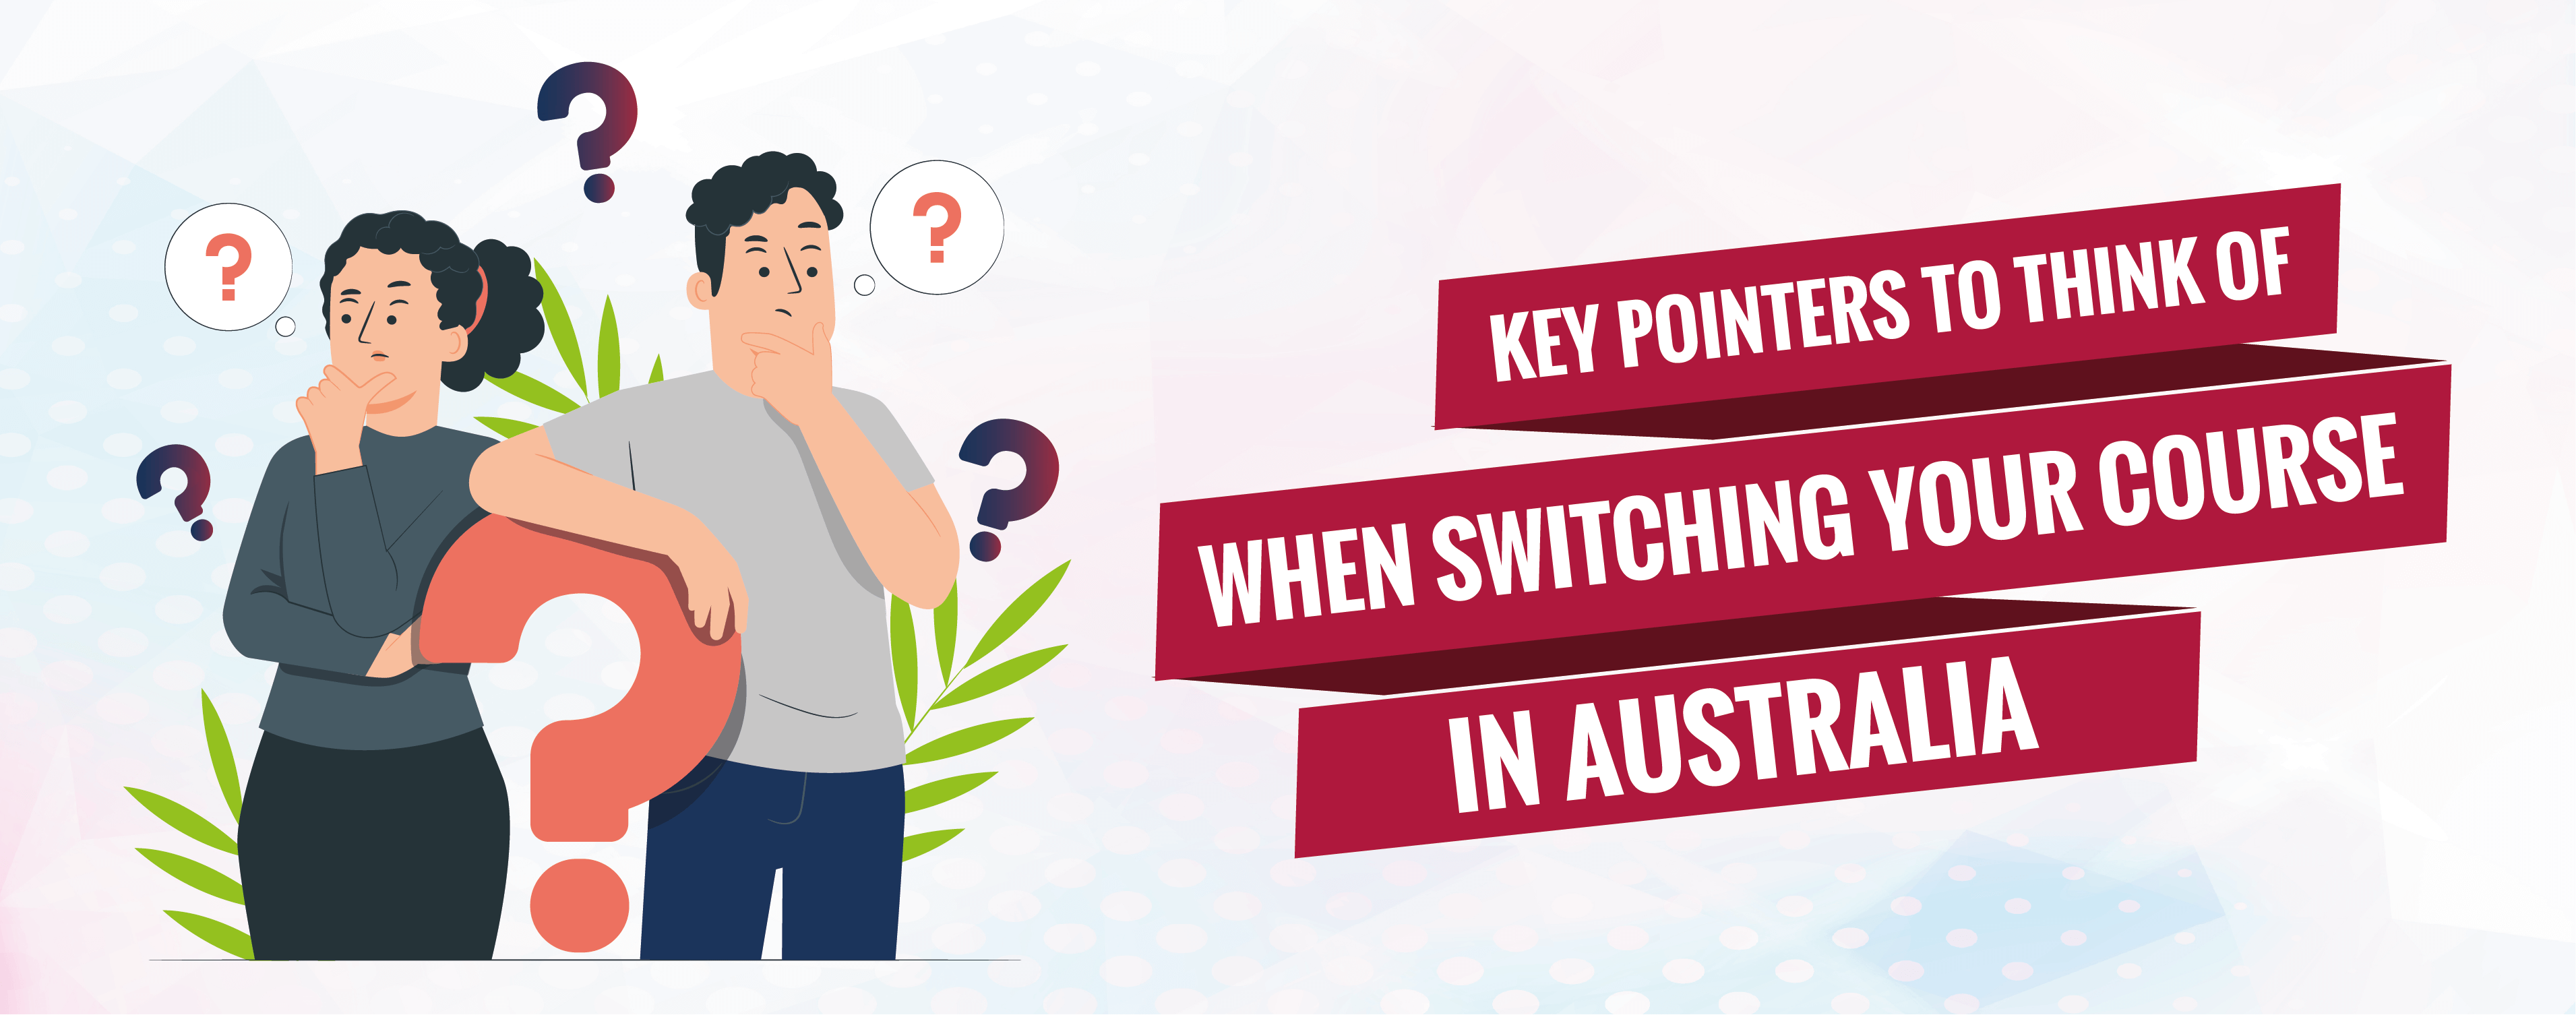 Key Pointers to Consider When Switching Your Course in Australia